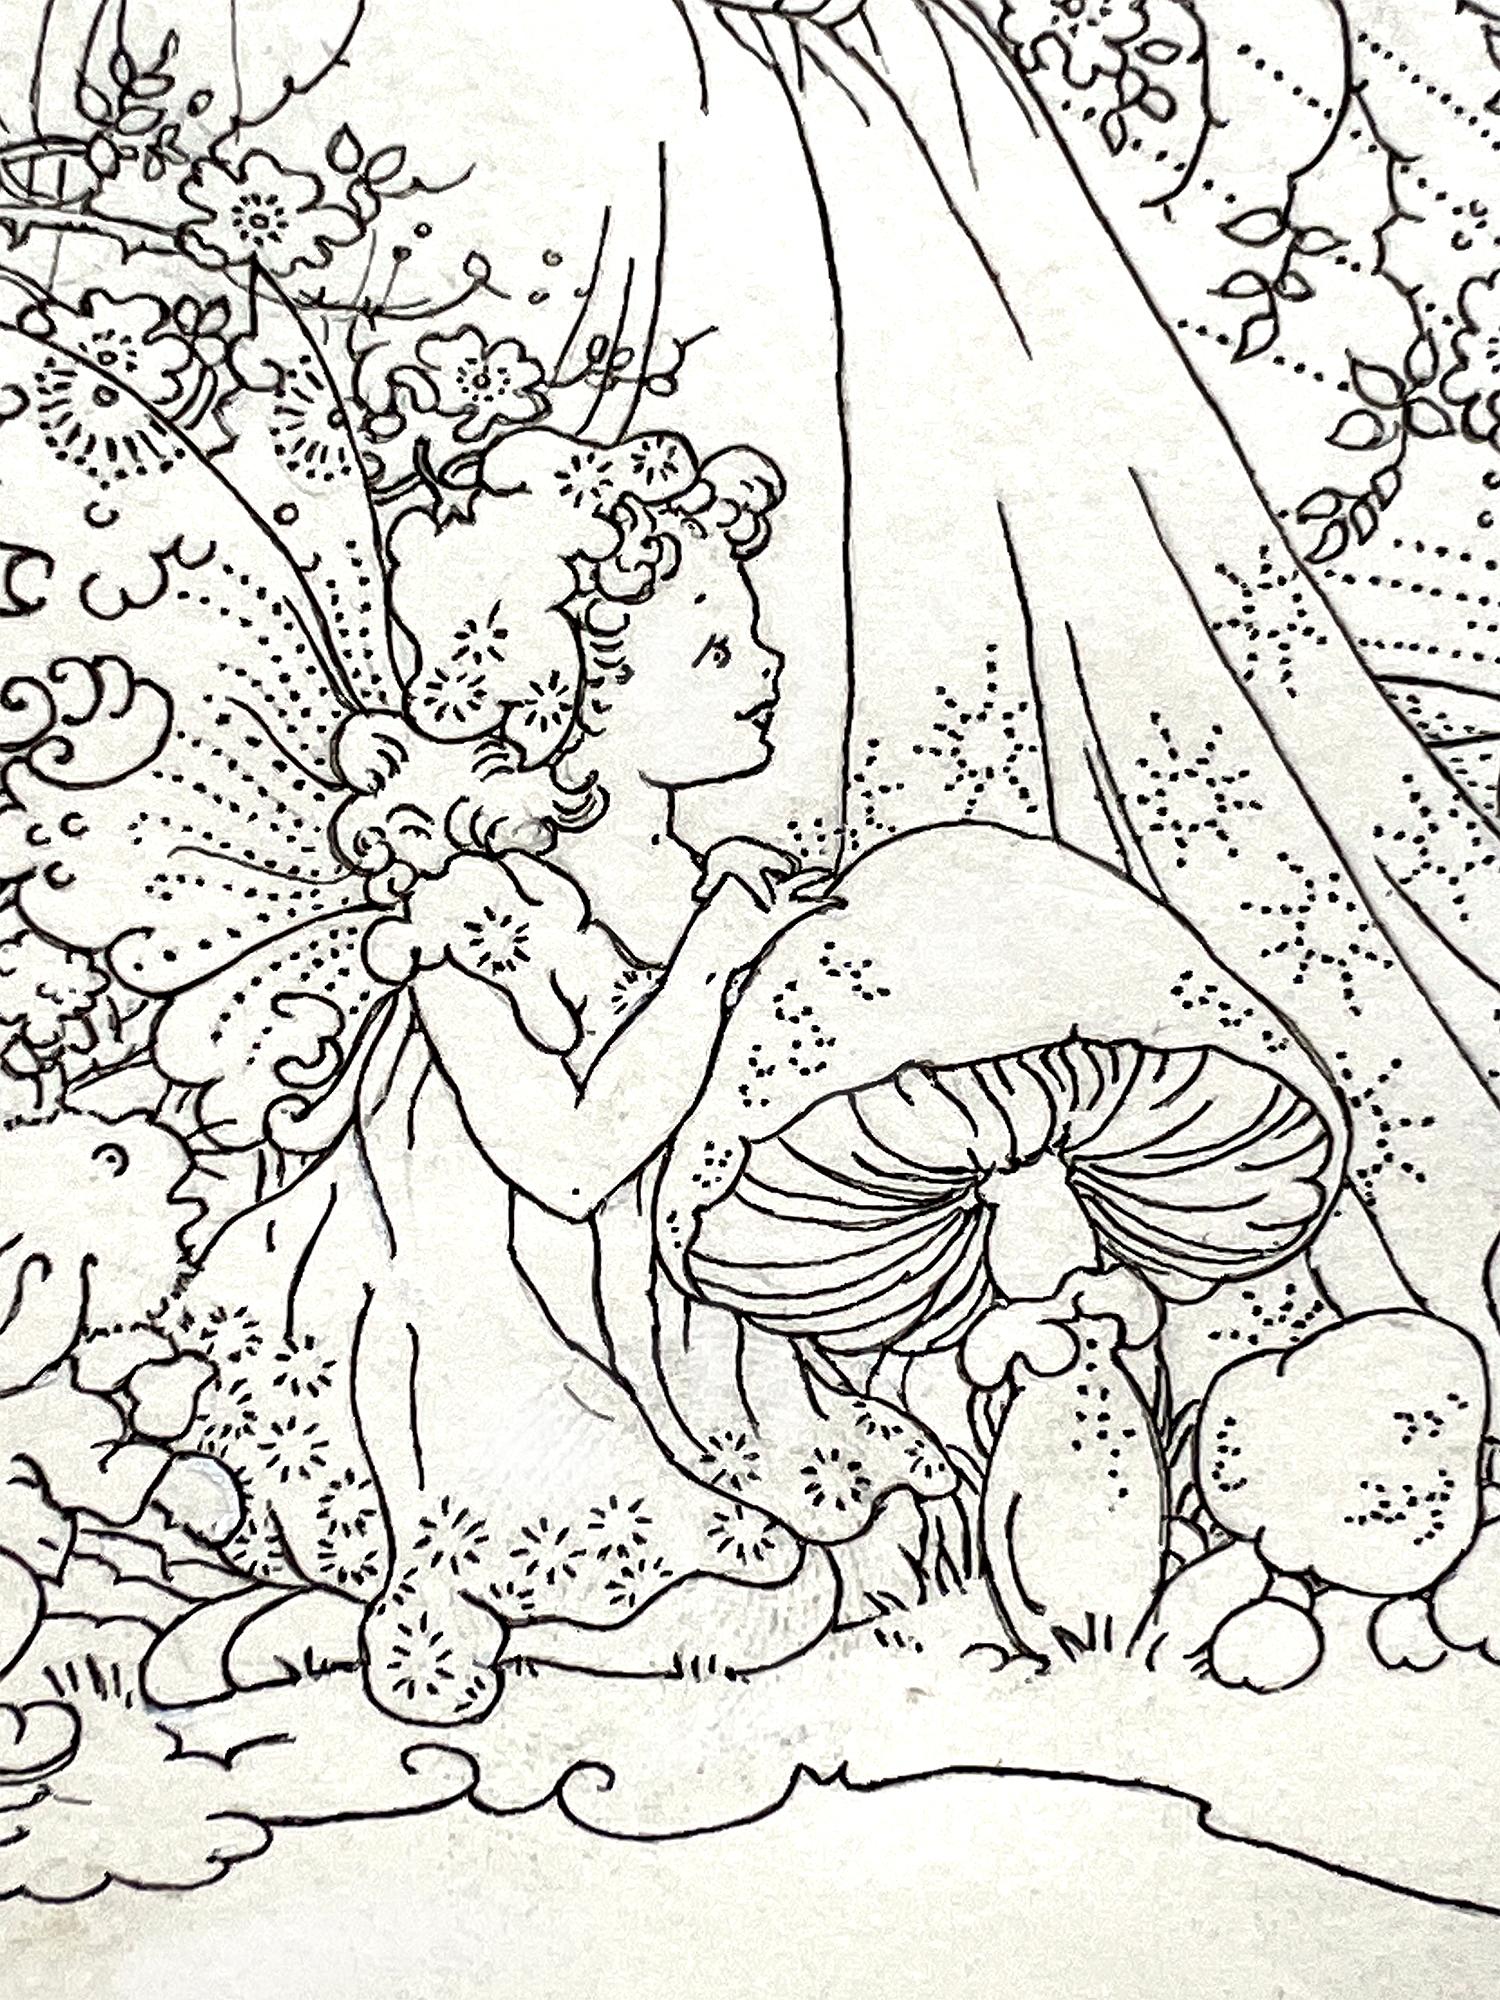 Wonderland Tale - Fairy Tale - Female Illustrator - The work is meticulously rendered in an exacting technique of line to the point of wonderment. Yet, Baxter can obtain an ethereality to her characters that are in keeping with the fantasy nature of